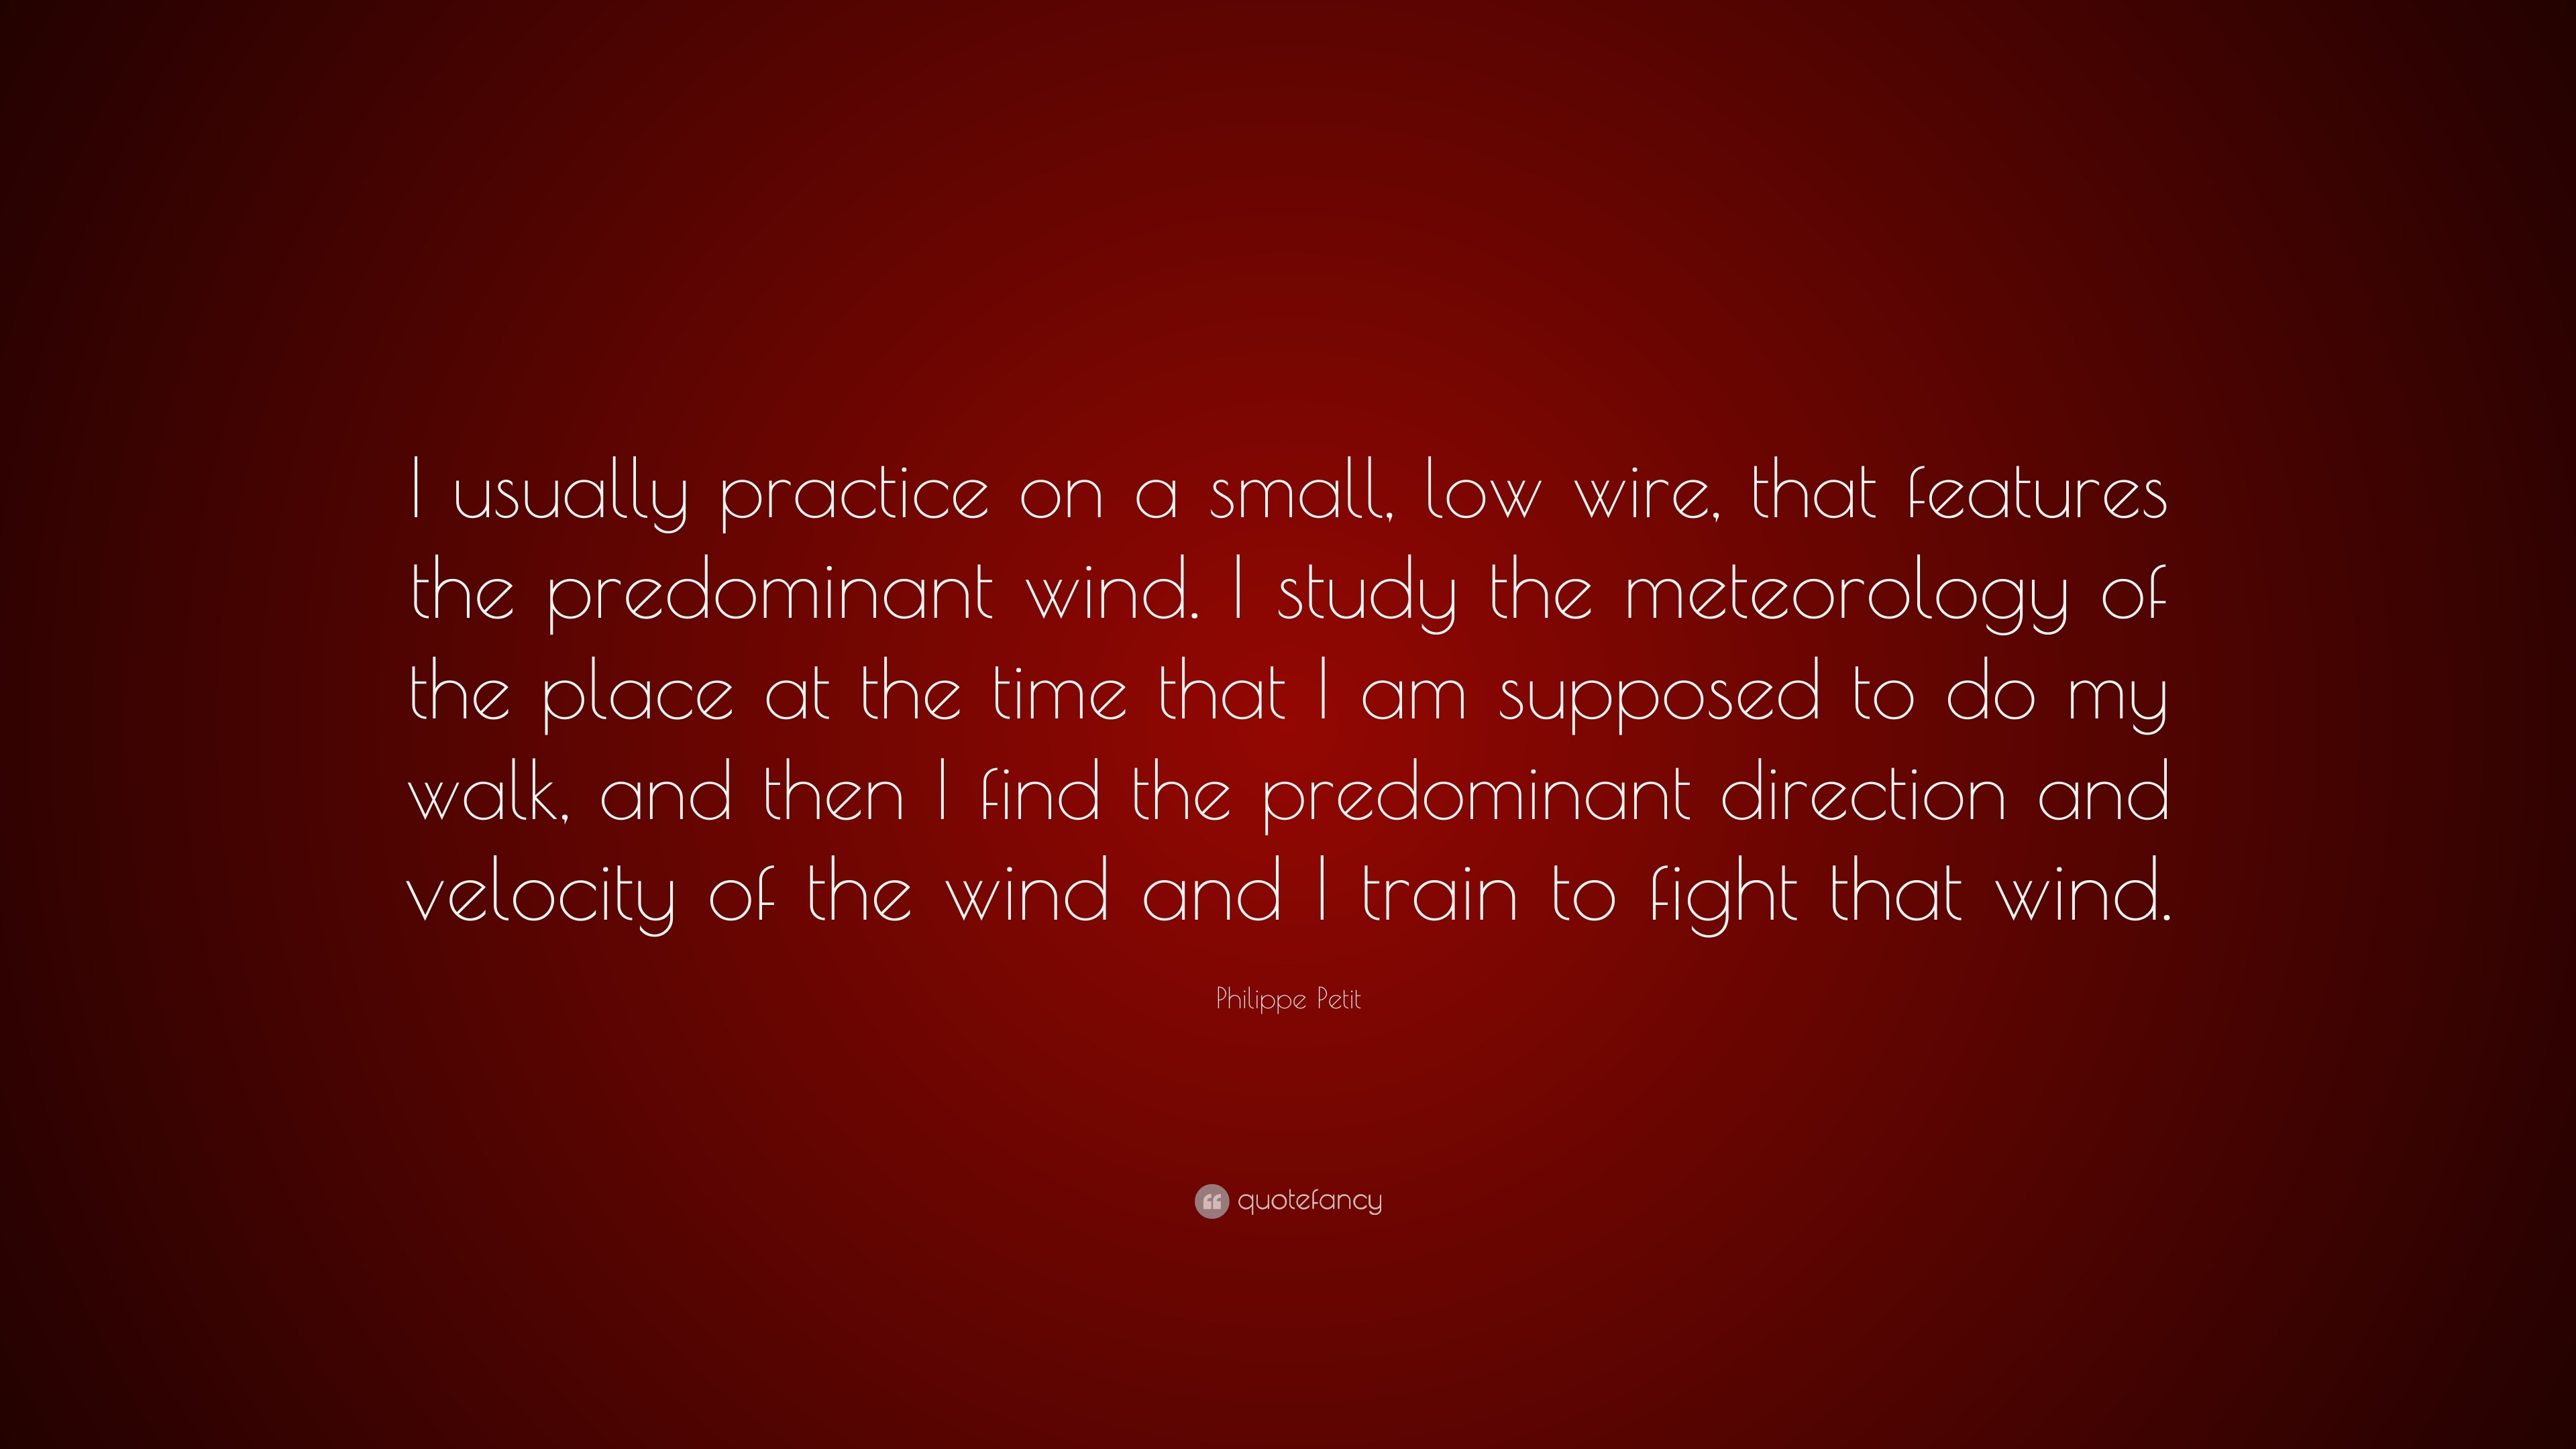 https://quotefancy.com/media/wallpaper/3840x2160/1311161-Philippe-Petit-Quote-I-usually-practice-on-a-small-low-wire-that.jpg